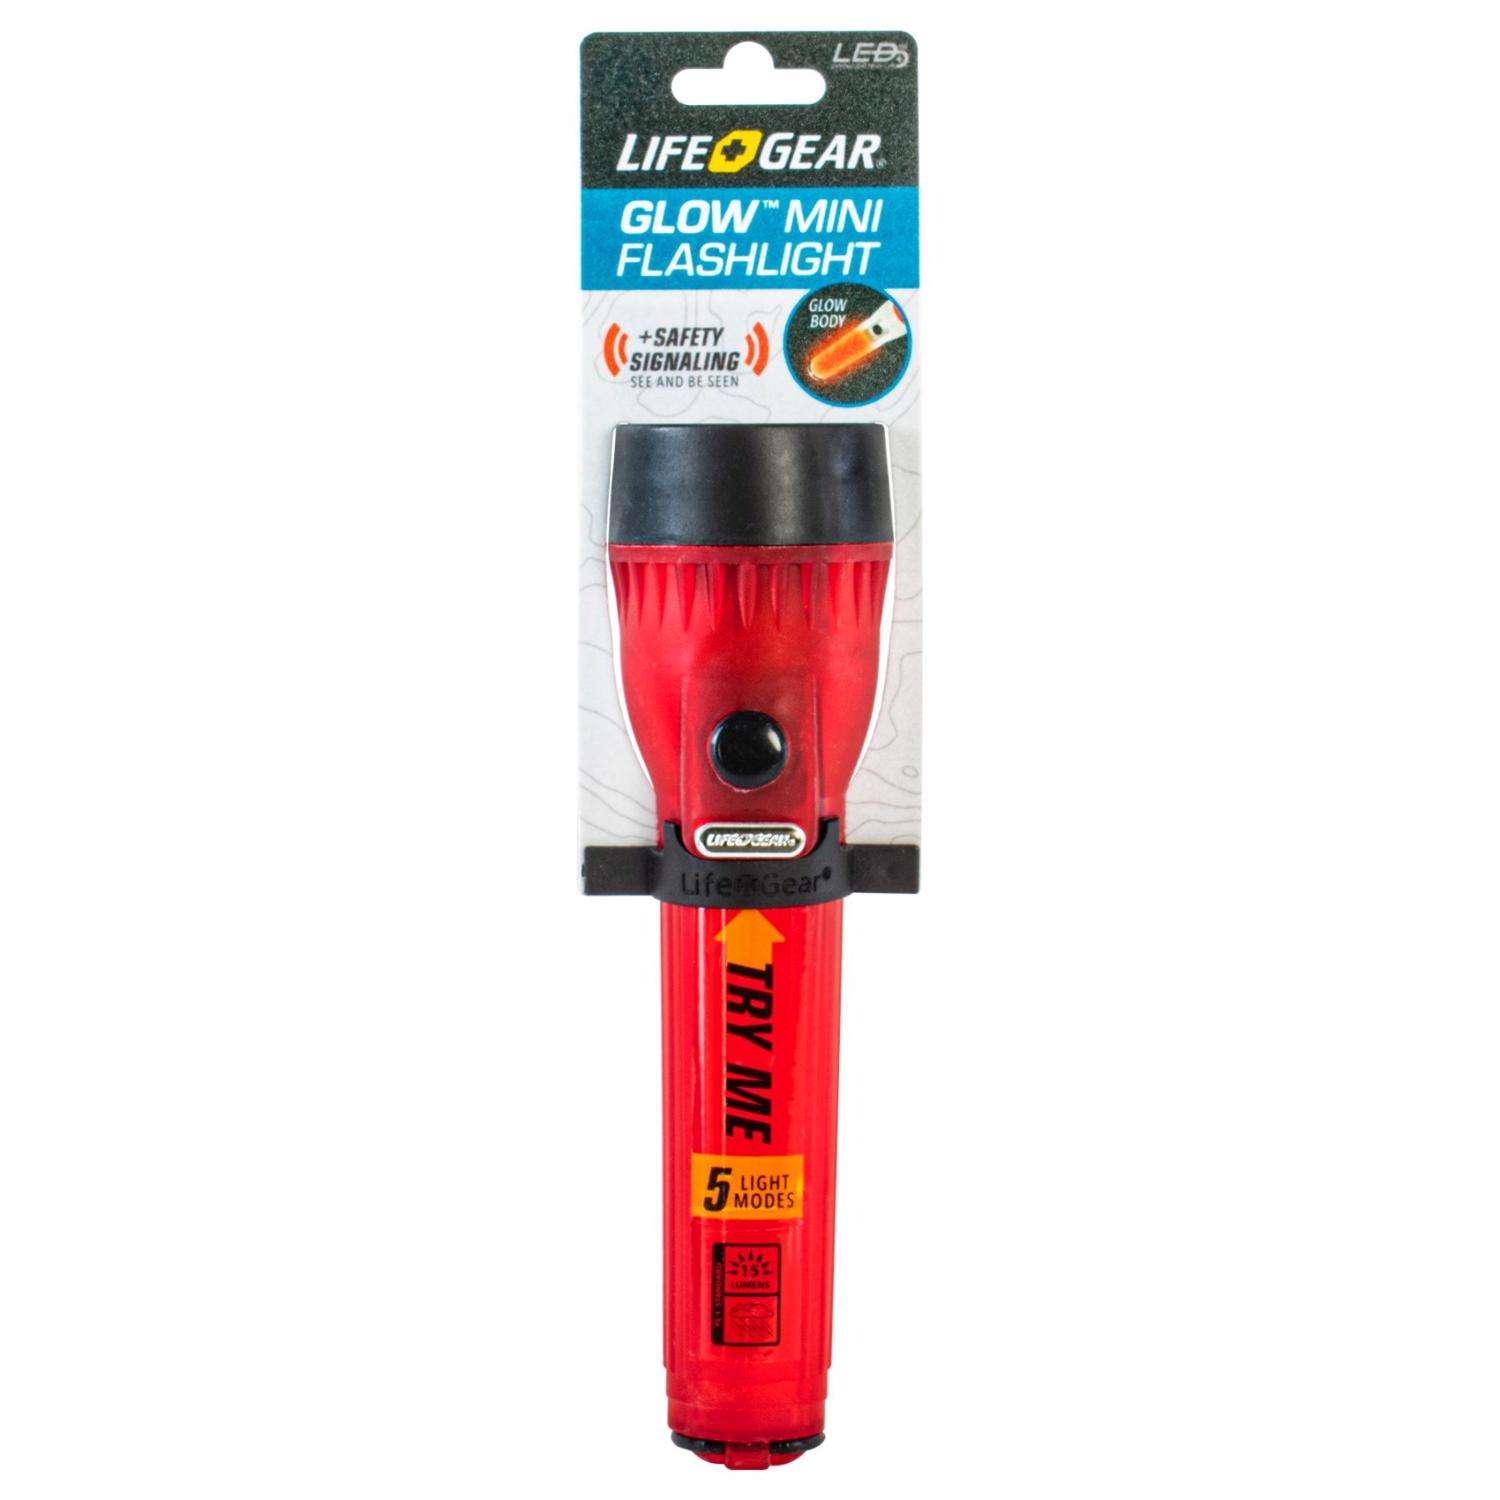 Life+Gear Glow lm Red LED Flashlight LR44 Battery Ace Hardware